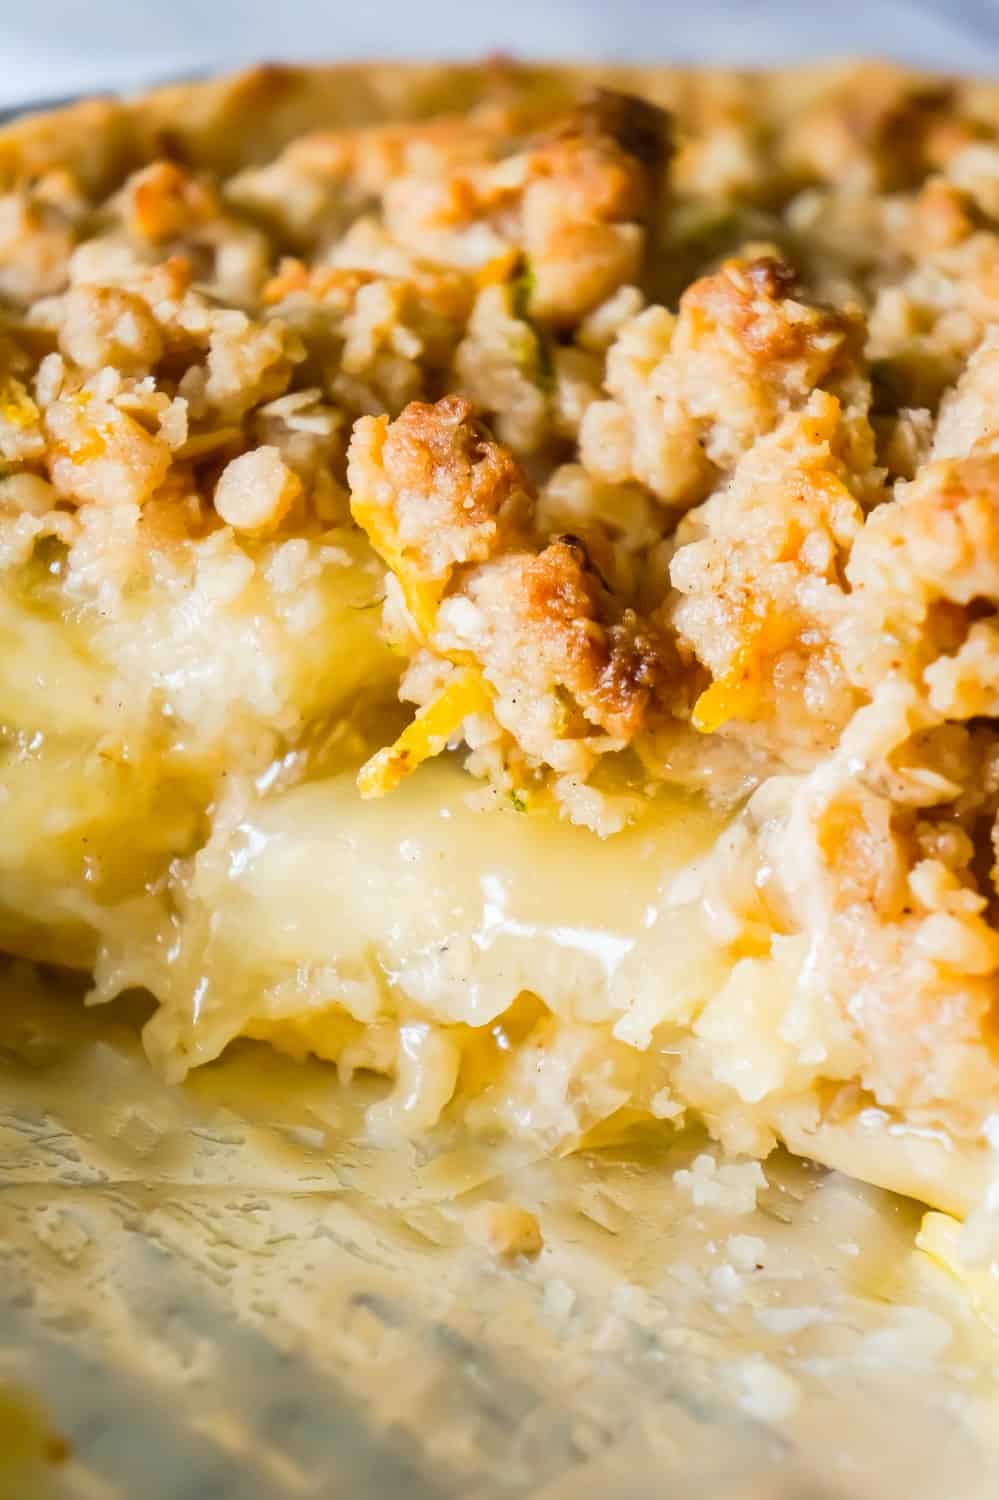 Apple Pie with Crumble Topping is an easy apple pie recipe using store bought crust and pie filling topped with a homemade crumble topping with hints of cinnamon and citrus.